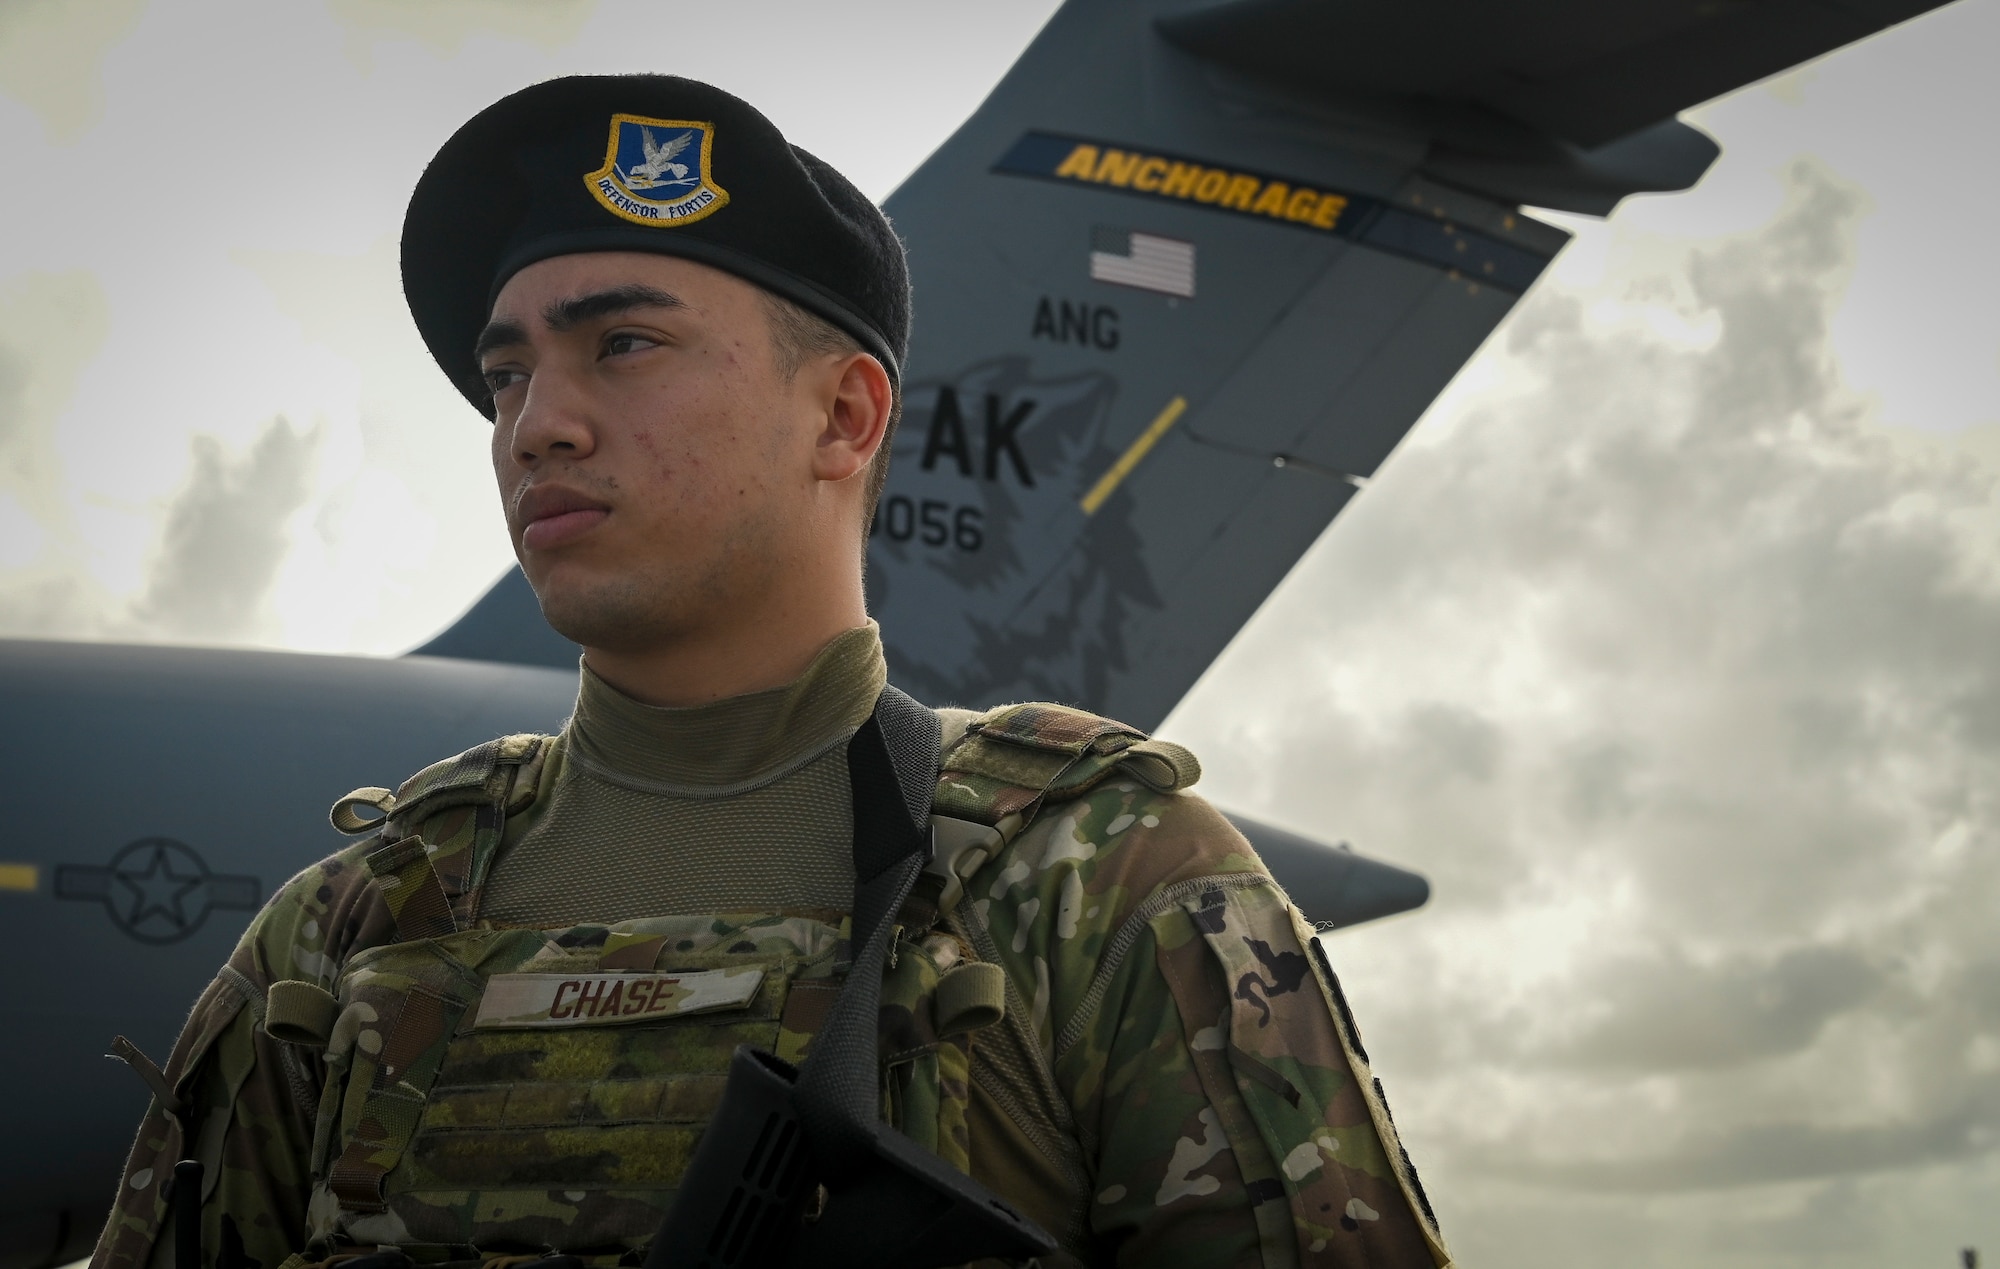 U.S. Air Force Airman 1st Class Brayven Chase, assigned to the 254th Security Forces Squadron, provides flight line security during exercise Cope North 22 on Andersen Air Base, Guam, Feb. 14, 2022.